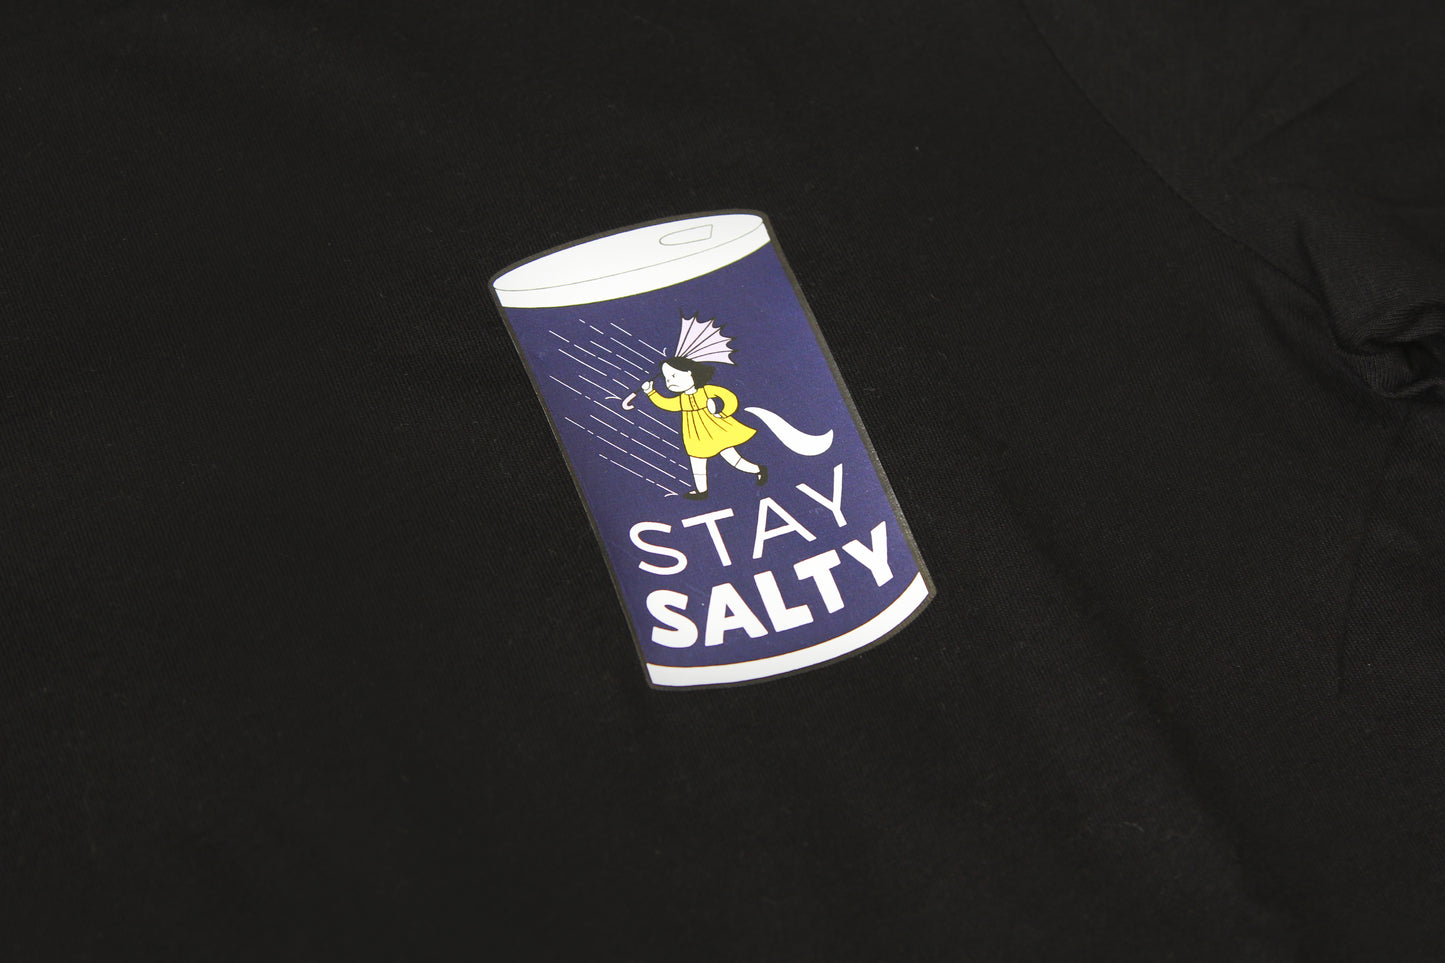 A closeup photo of a grumpy salt girl in a salt can that says "Stay Salty" printed on the right front chest of a black tshirt.